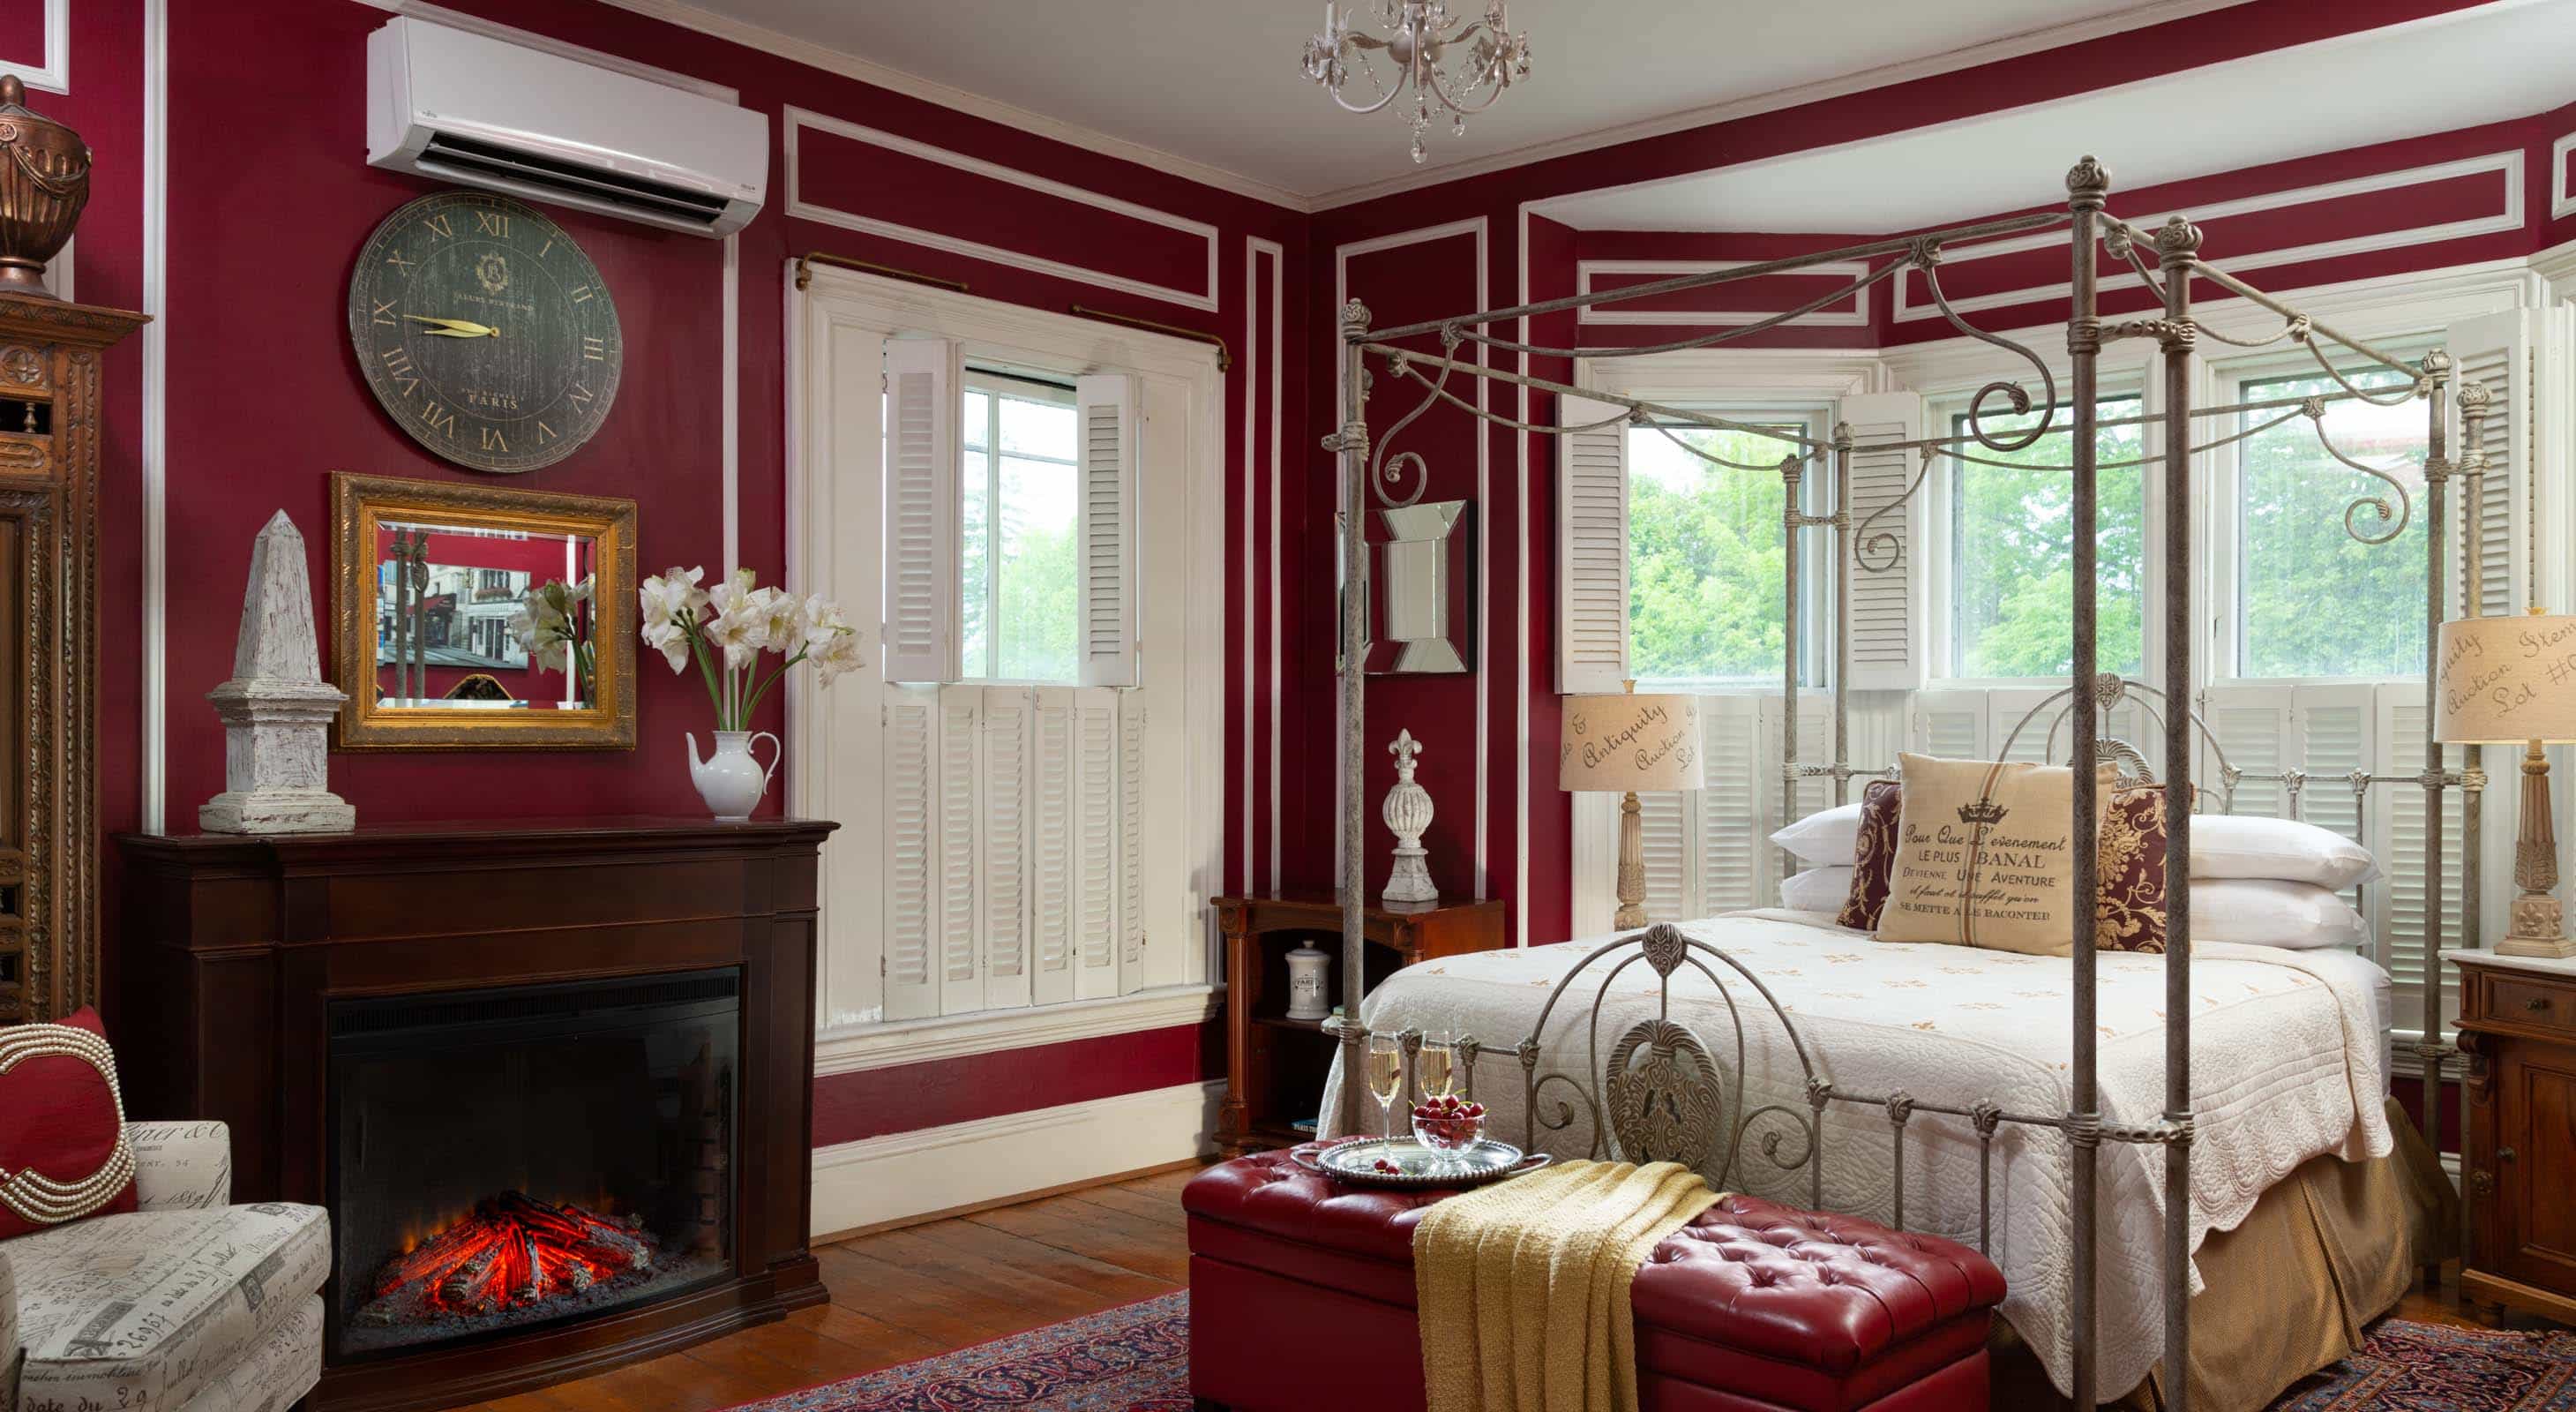 Four-poster queen bed in a room with burgundy painted walls and a fireplace